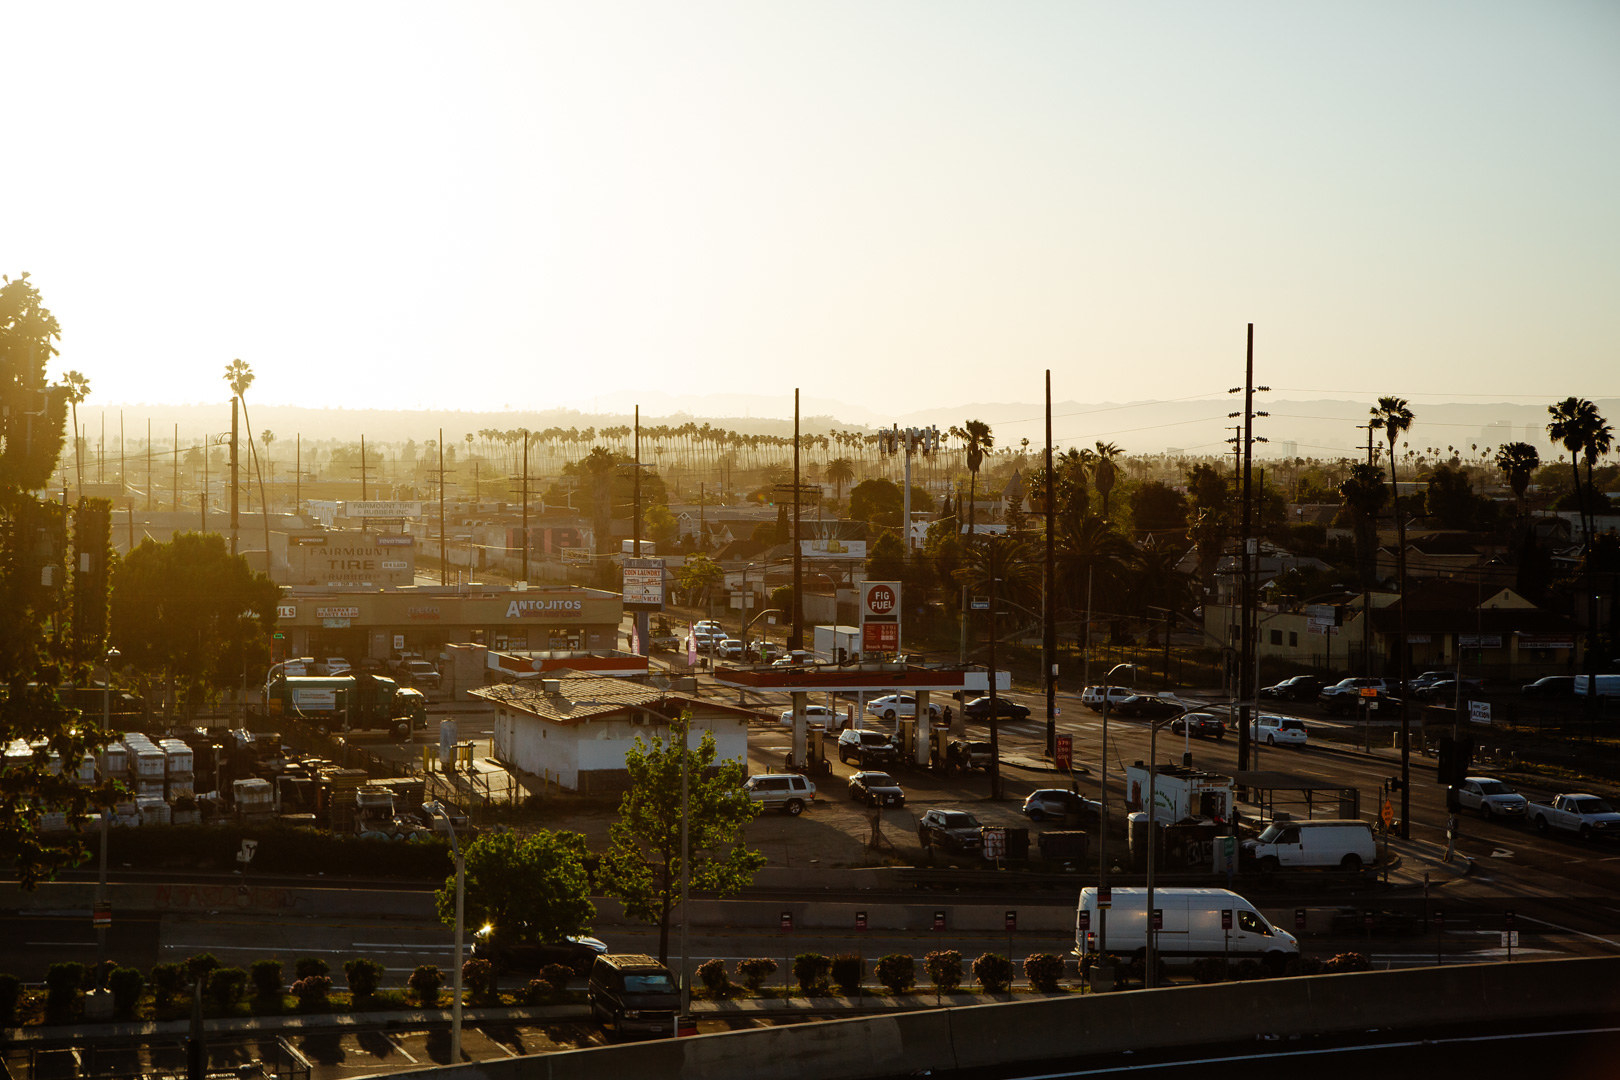 Parking lots, cars, and businesses lit by a low sun